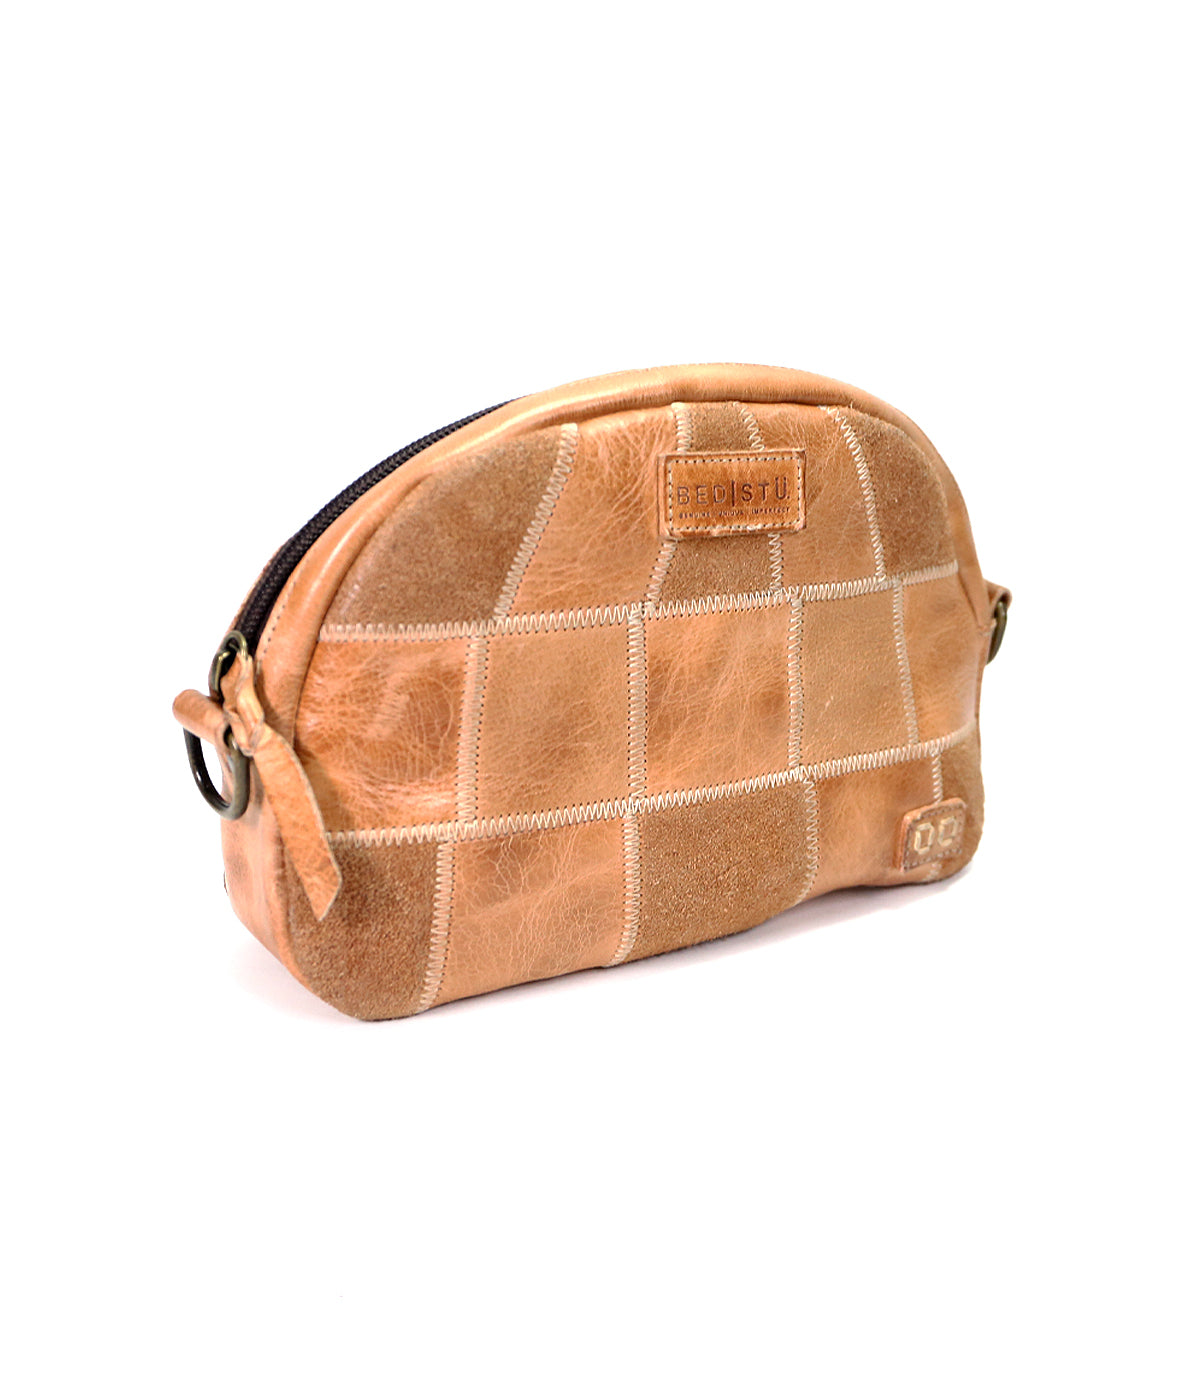 A light brown leather Abundance toiletry sling bag with a quilted design and Bed Stu logo, isolated on a white background.